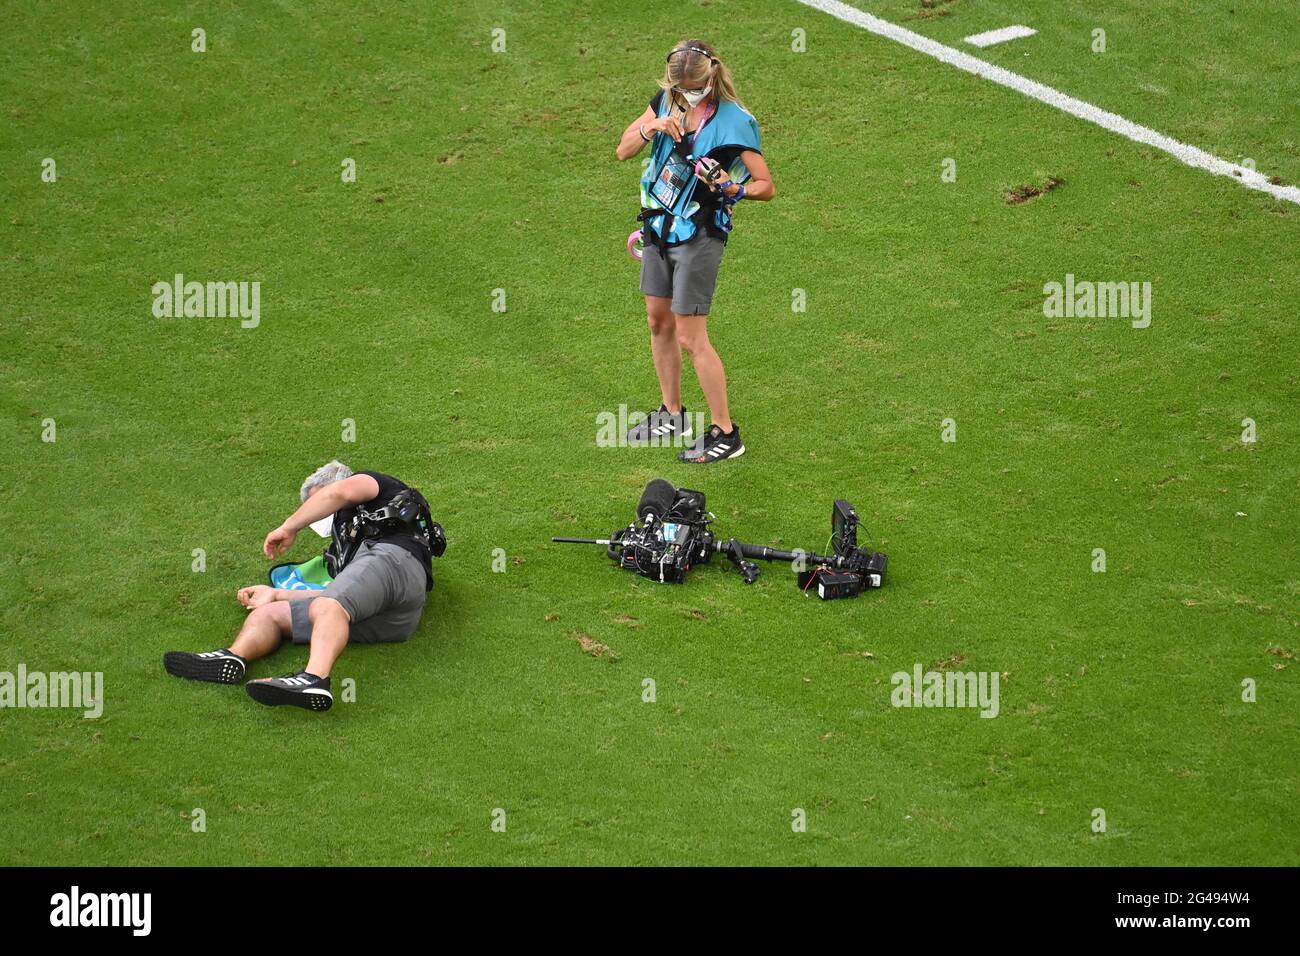 A cameraman falls and falls on the pitch. Group stage, preliminary round  group F, game M24, Portugal (POR) - Germany (GER) 2-4 on June 19, 2021 in  Muenchen/Fußball Arena (Allianz Arena). Football